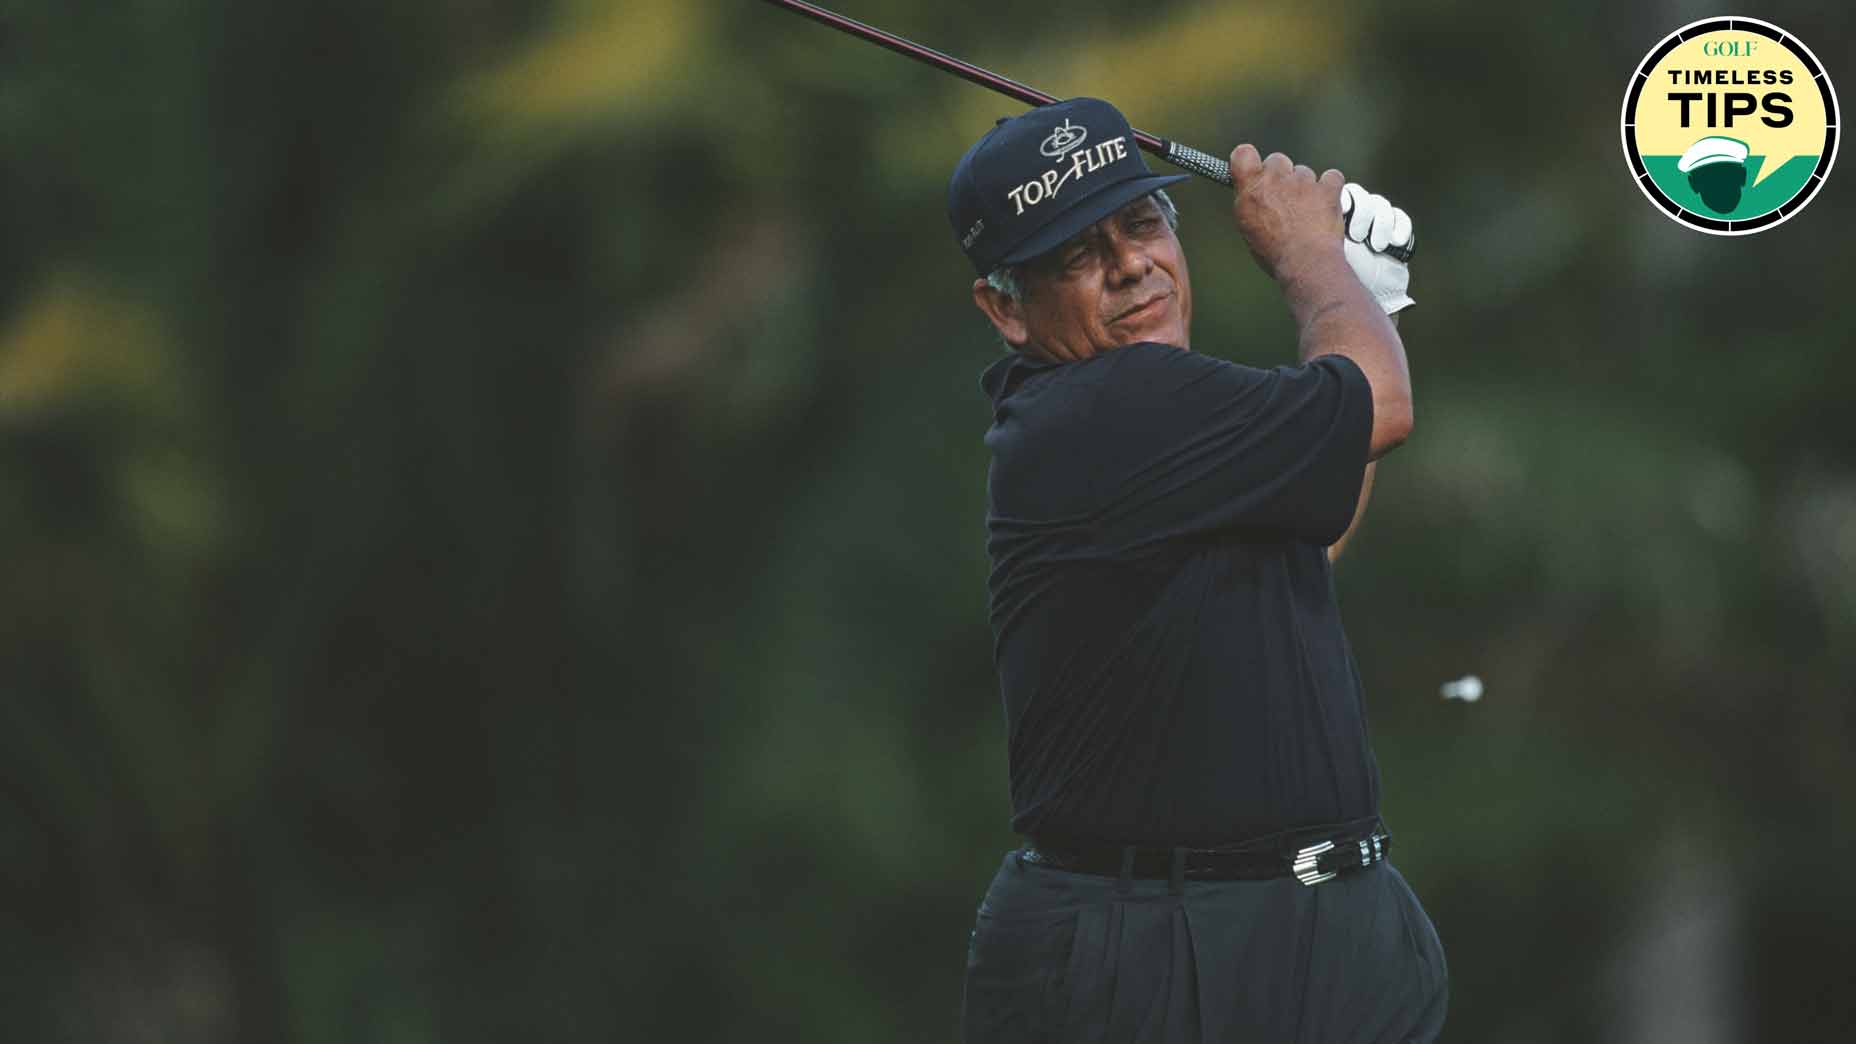 lee trevino swings a driver during the 2000 pga championship